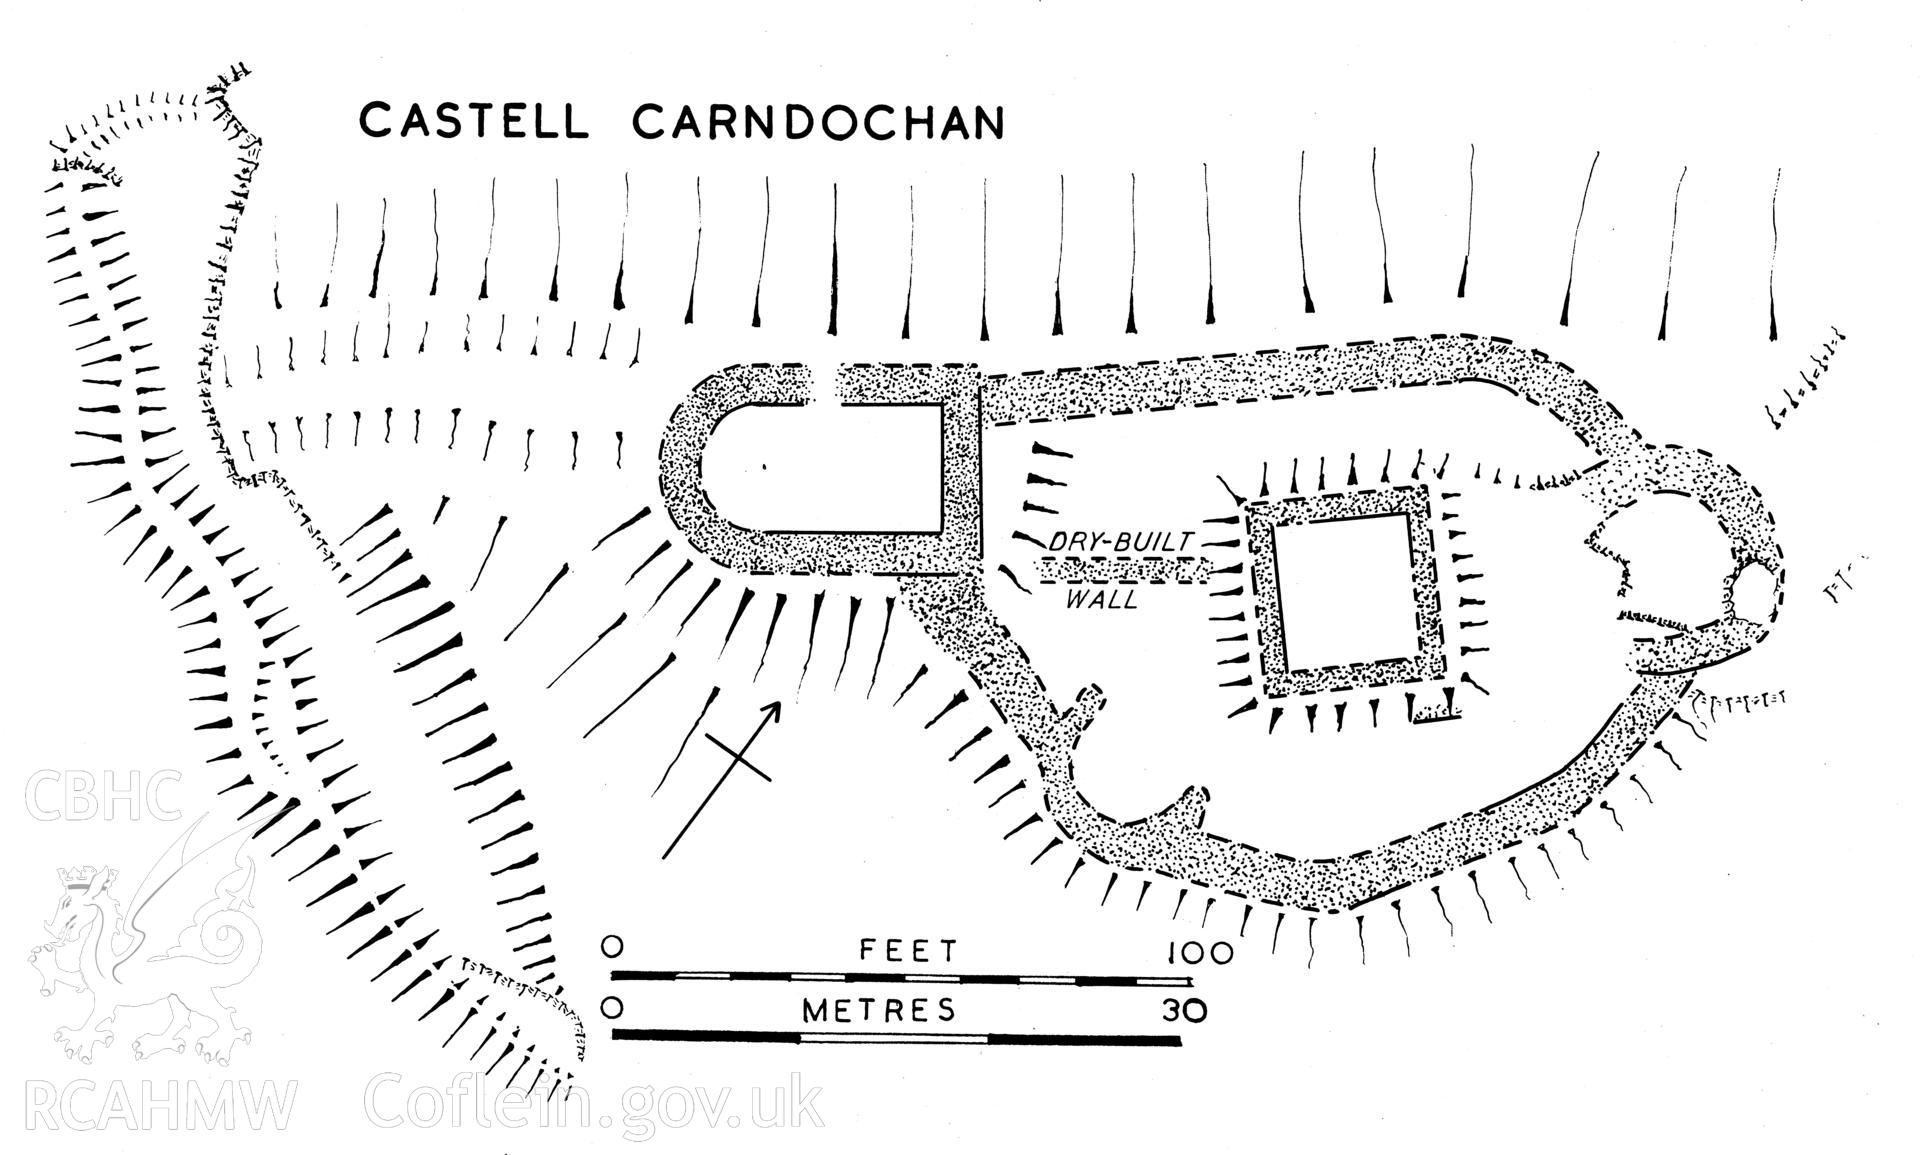 Dyeline copy of a measured plan of Castell Carndochan, produced by RCAHMW.